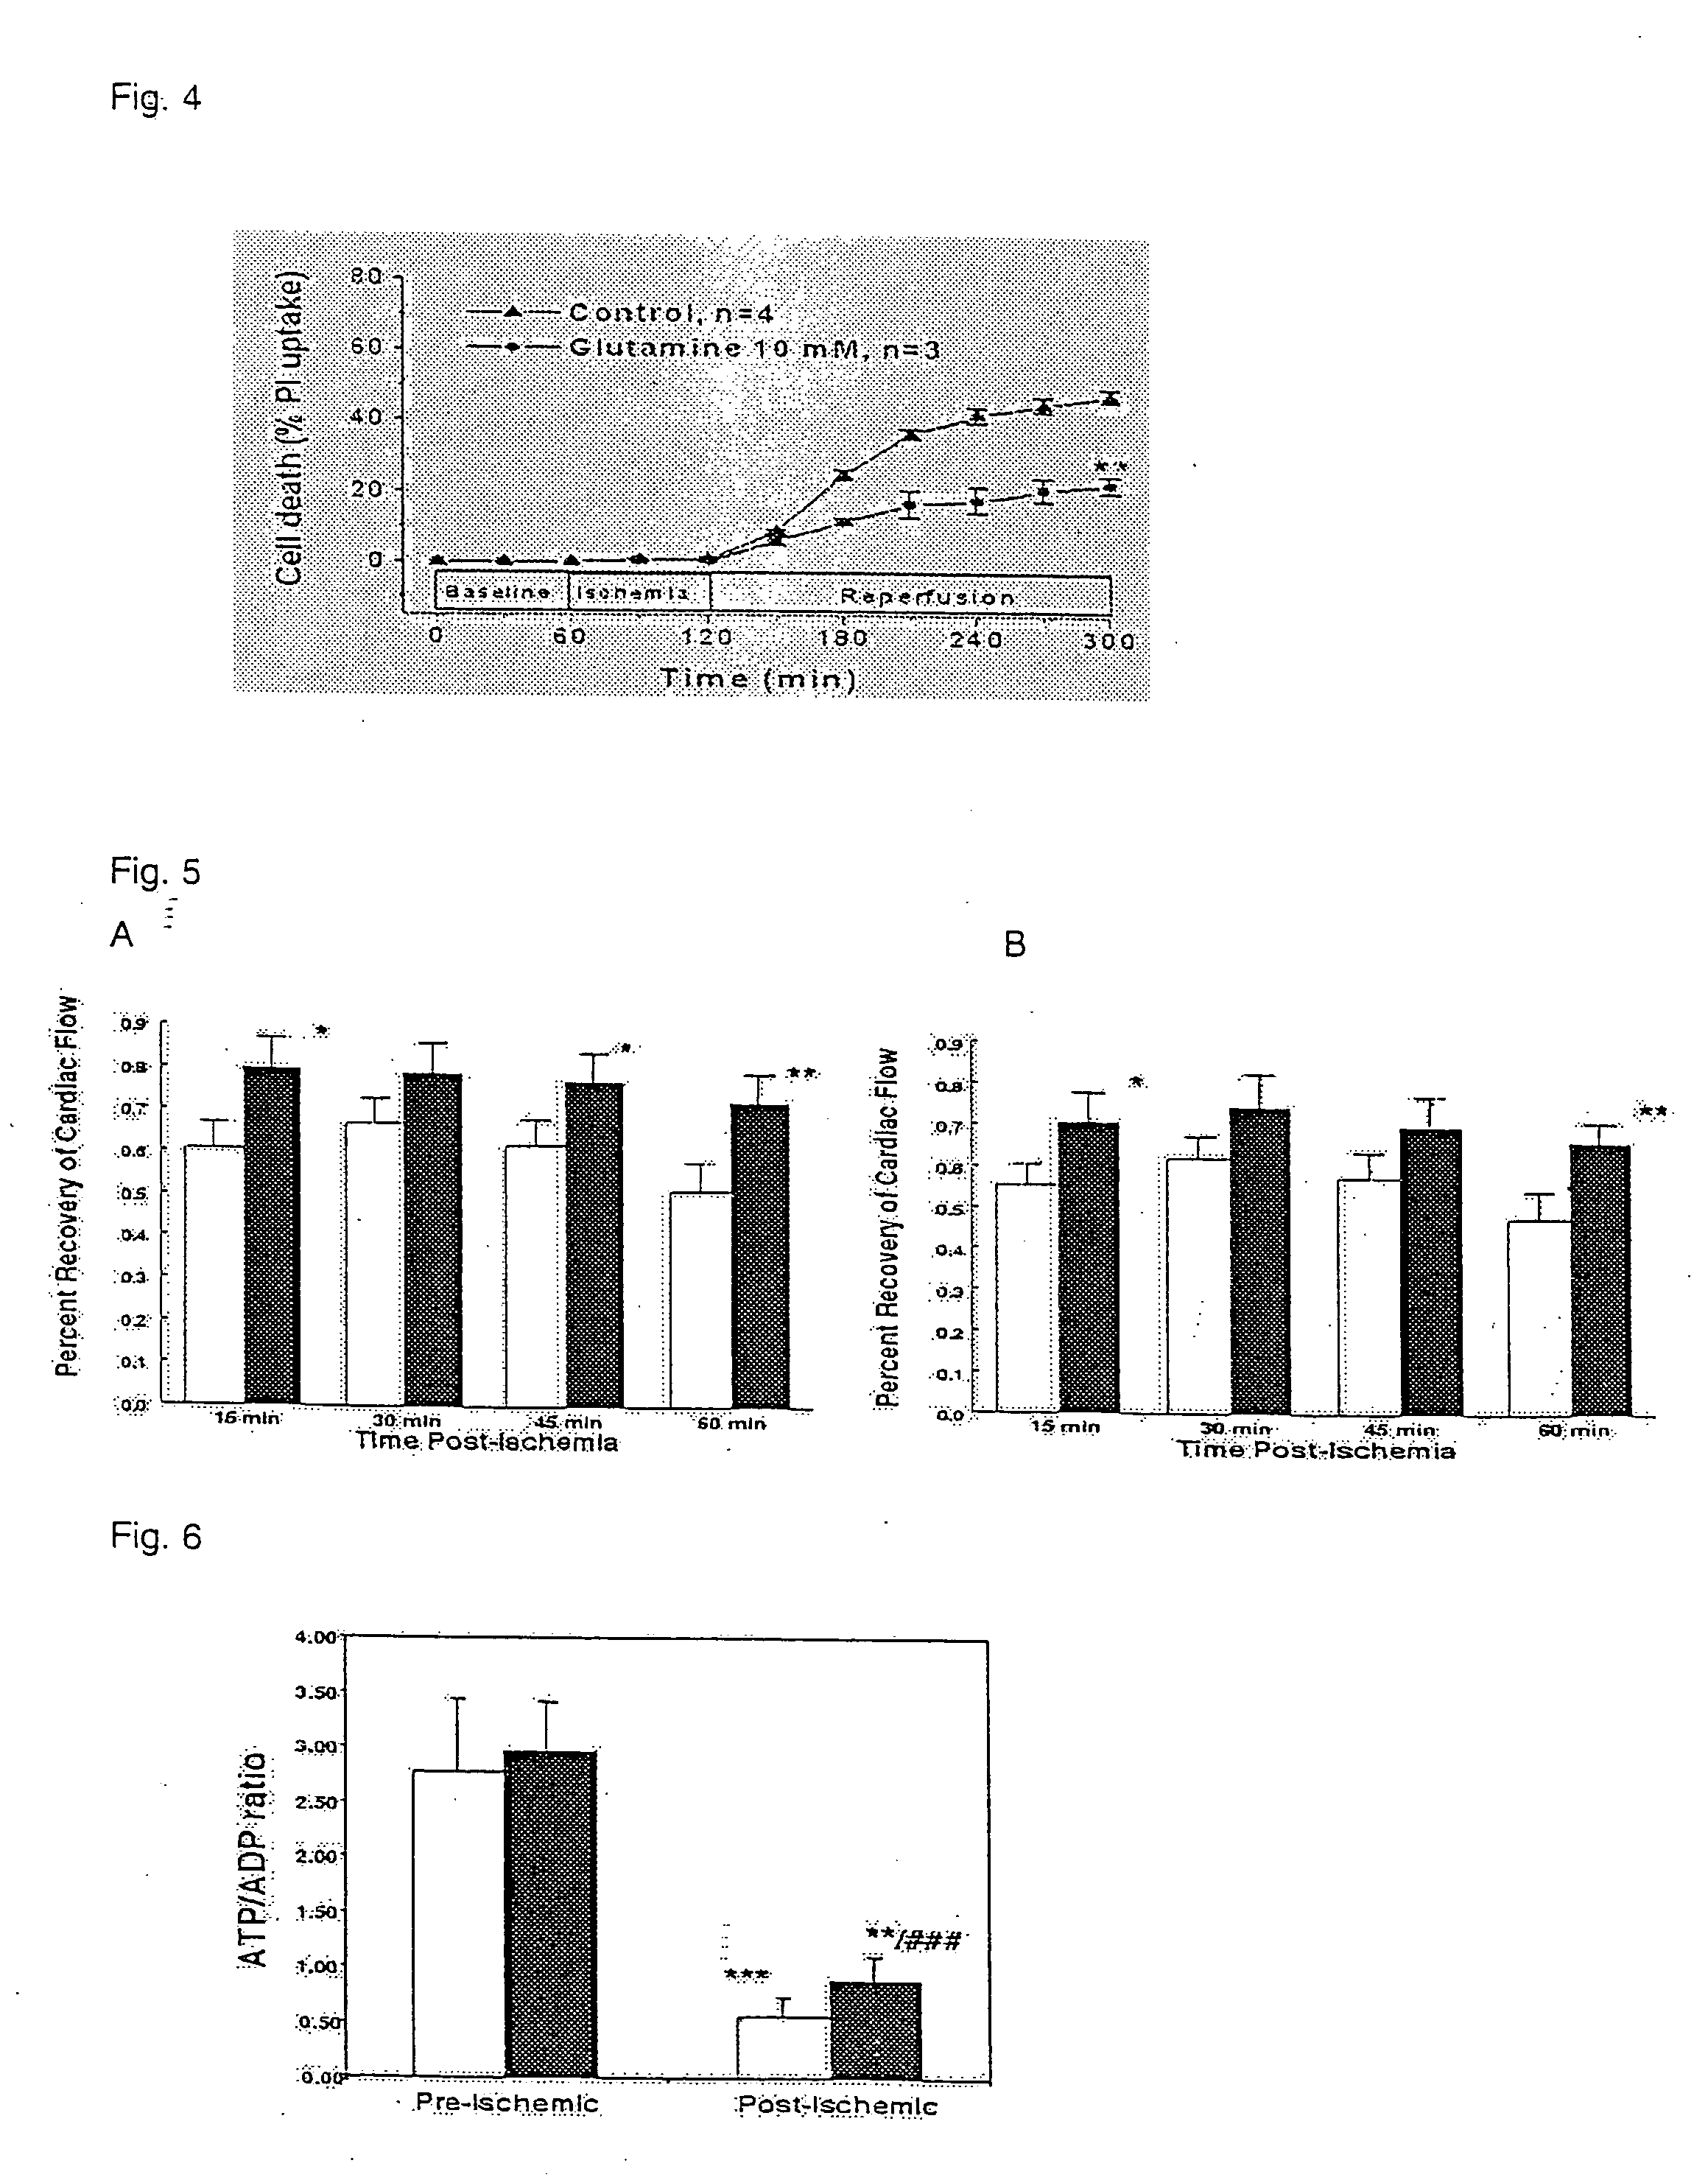 Glutamine for use in treating injury